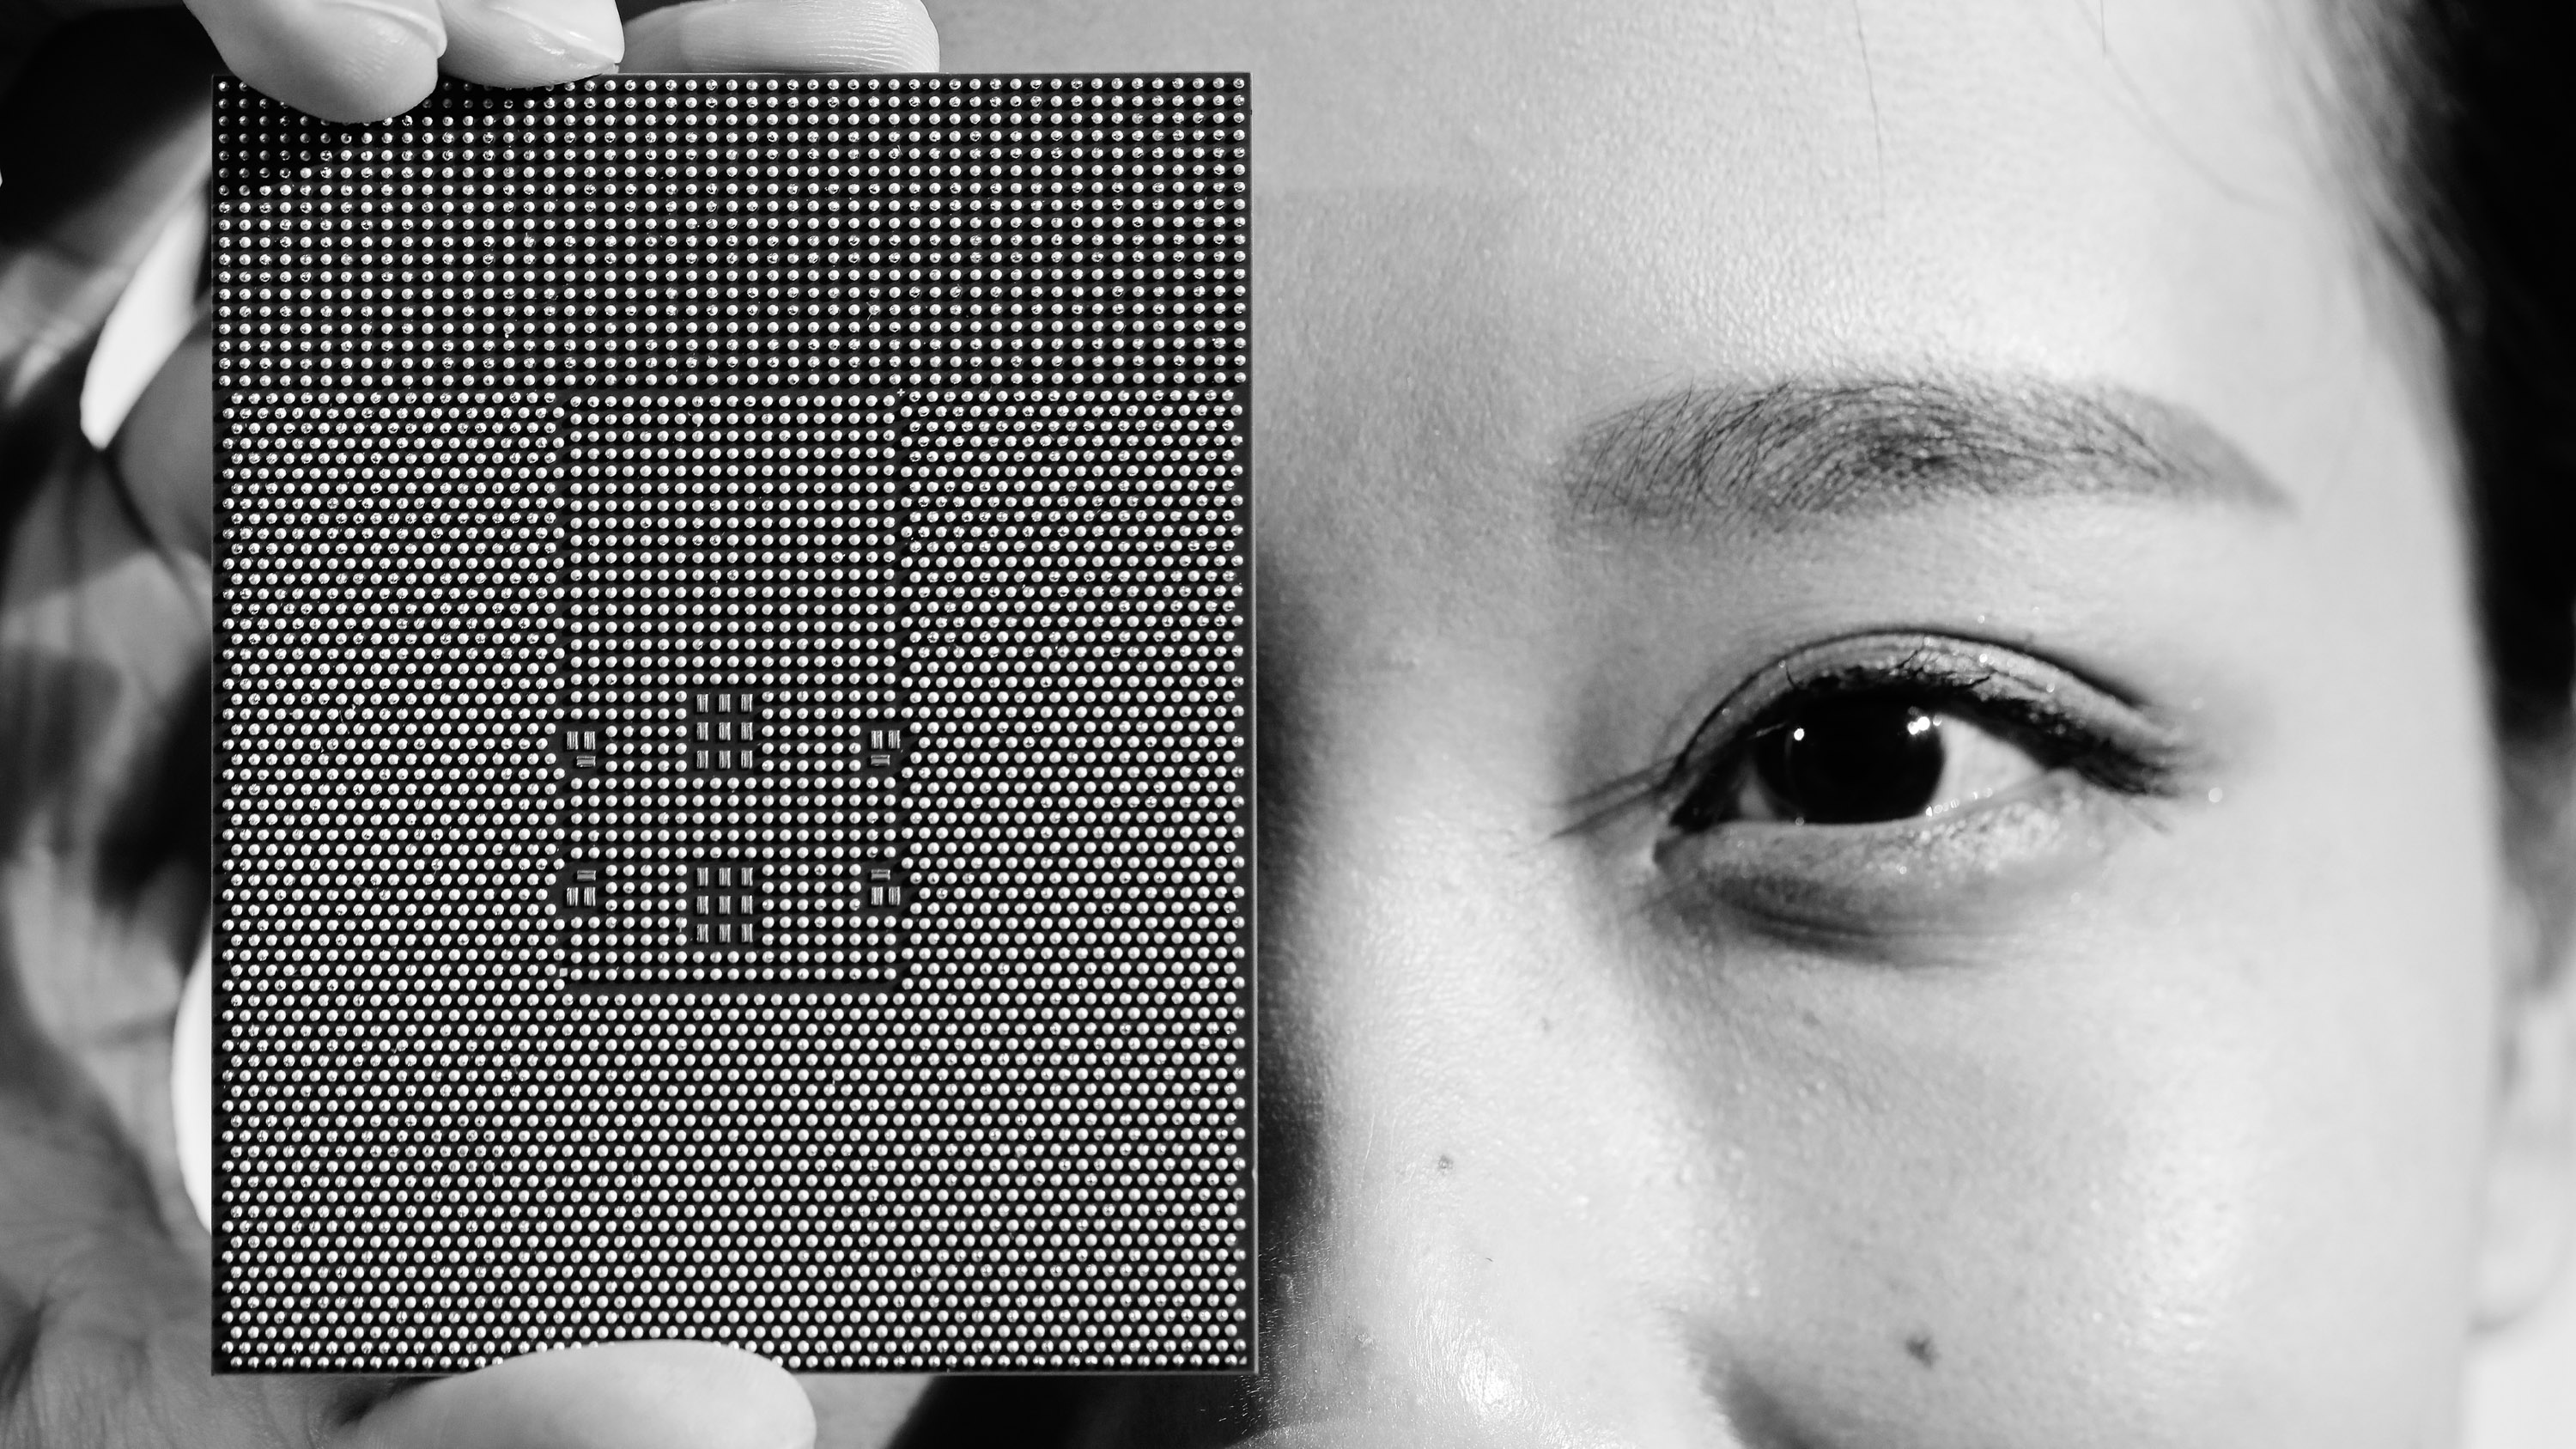 closeup photo of a Kungpeng 920 chip and a face with the chip held over one eye.